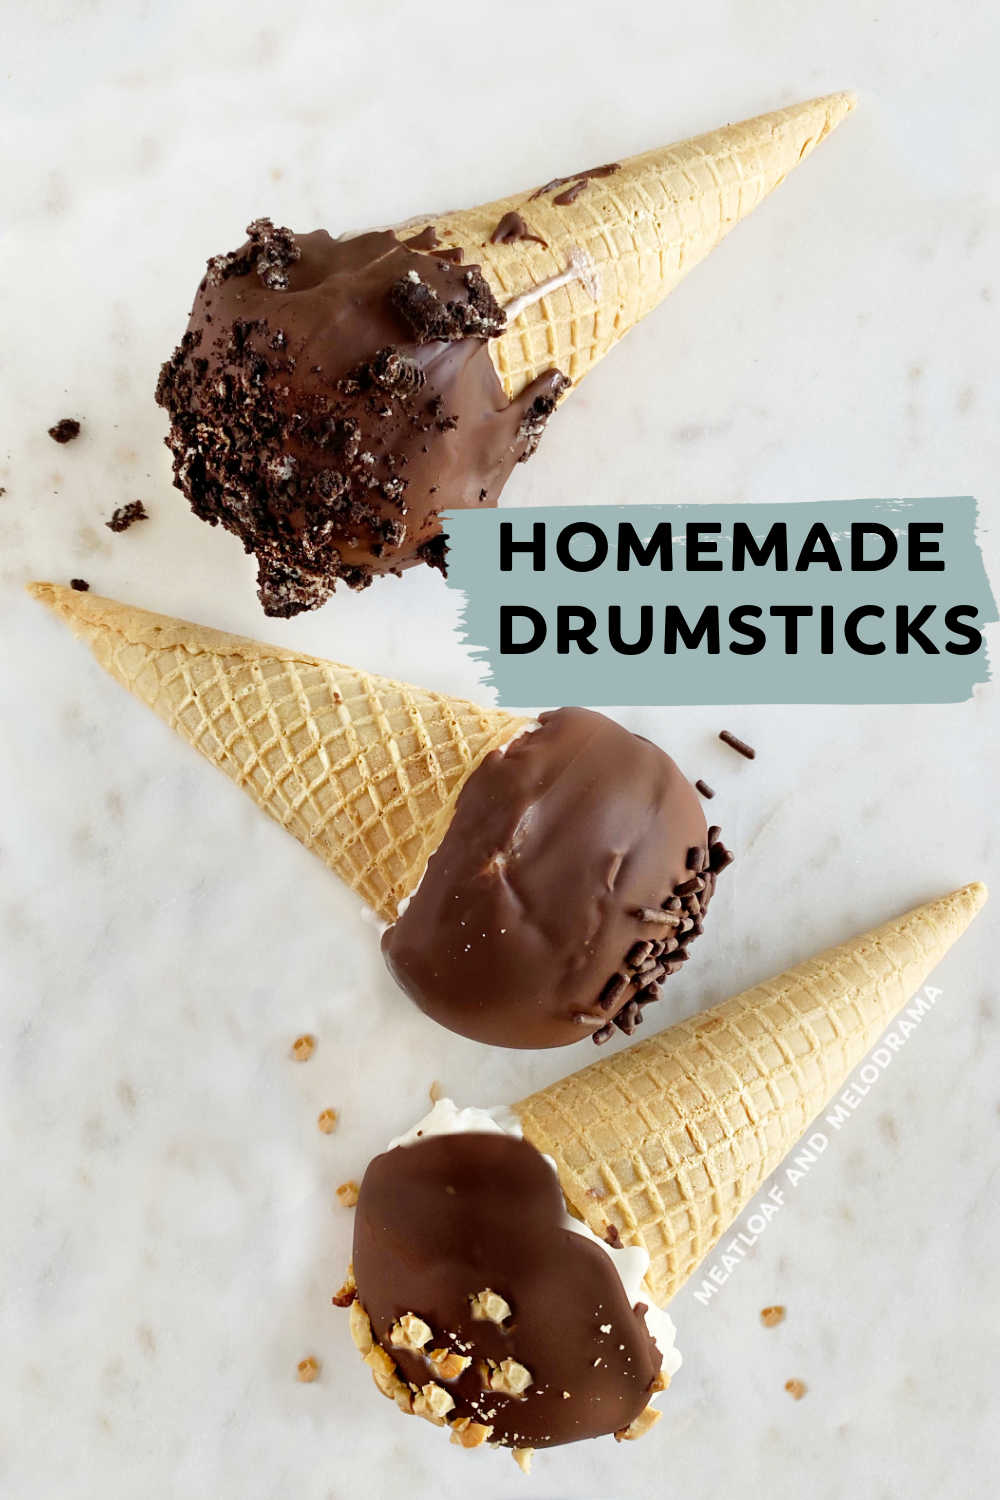 Homemade Drumsticks ice cream cones topped with a smooth chocolate shell are a delicious summer dessert or fun treat anytime. Use your favorite ice cream flavor and toppings, and get the kids to help make them! They're so much better than storebought! via @meamel